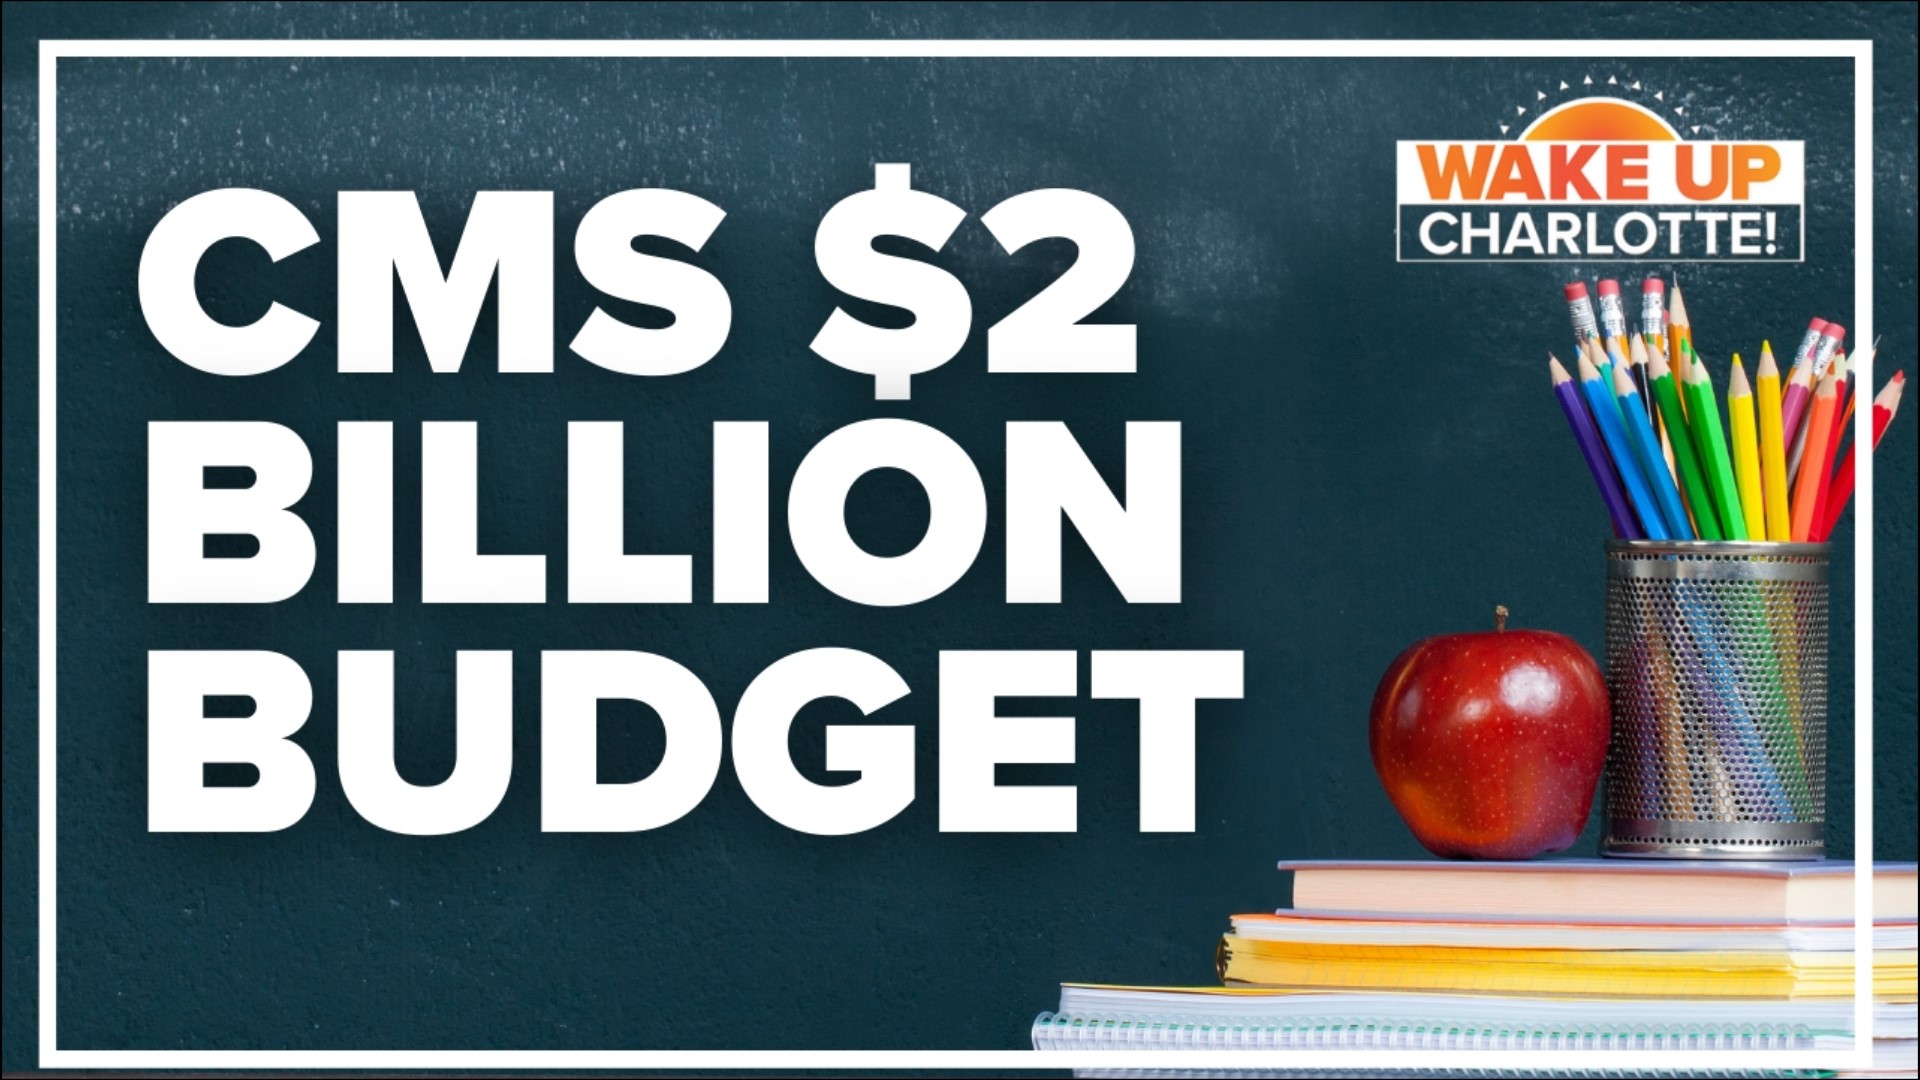 CMS will present its massive $2 billion budget to Mecklenburg County leaders.